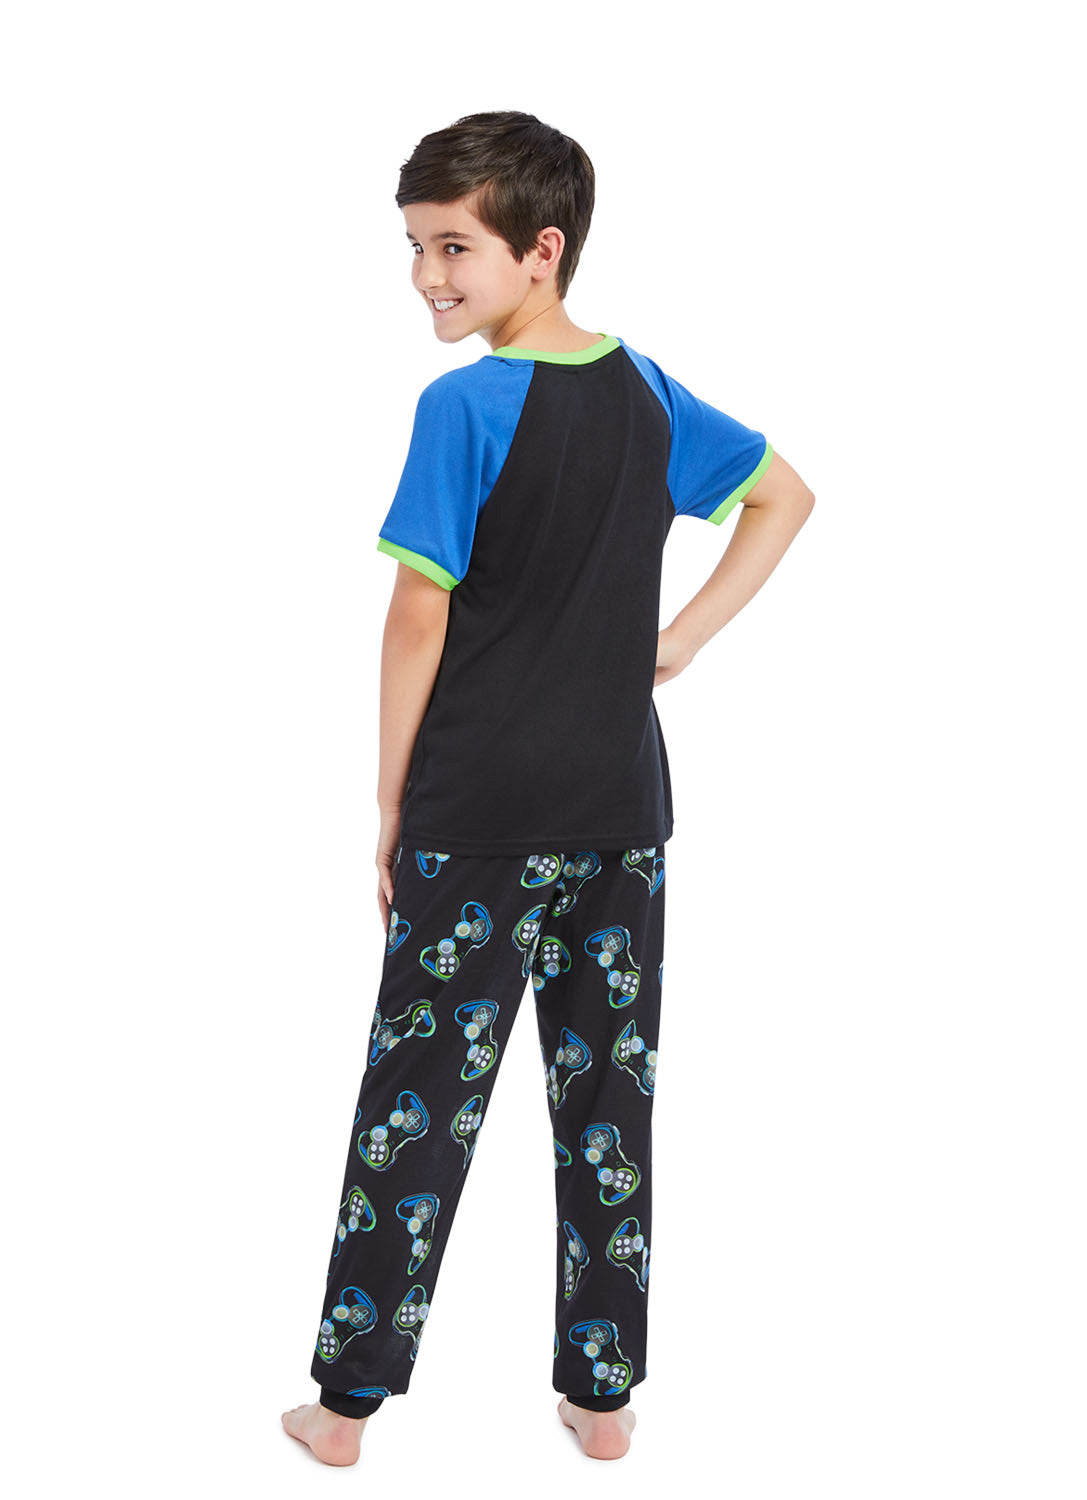 Back view Boy wearing Pajama Set Gamer, t-shirt (black & blue) with print and pants (black) with print